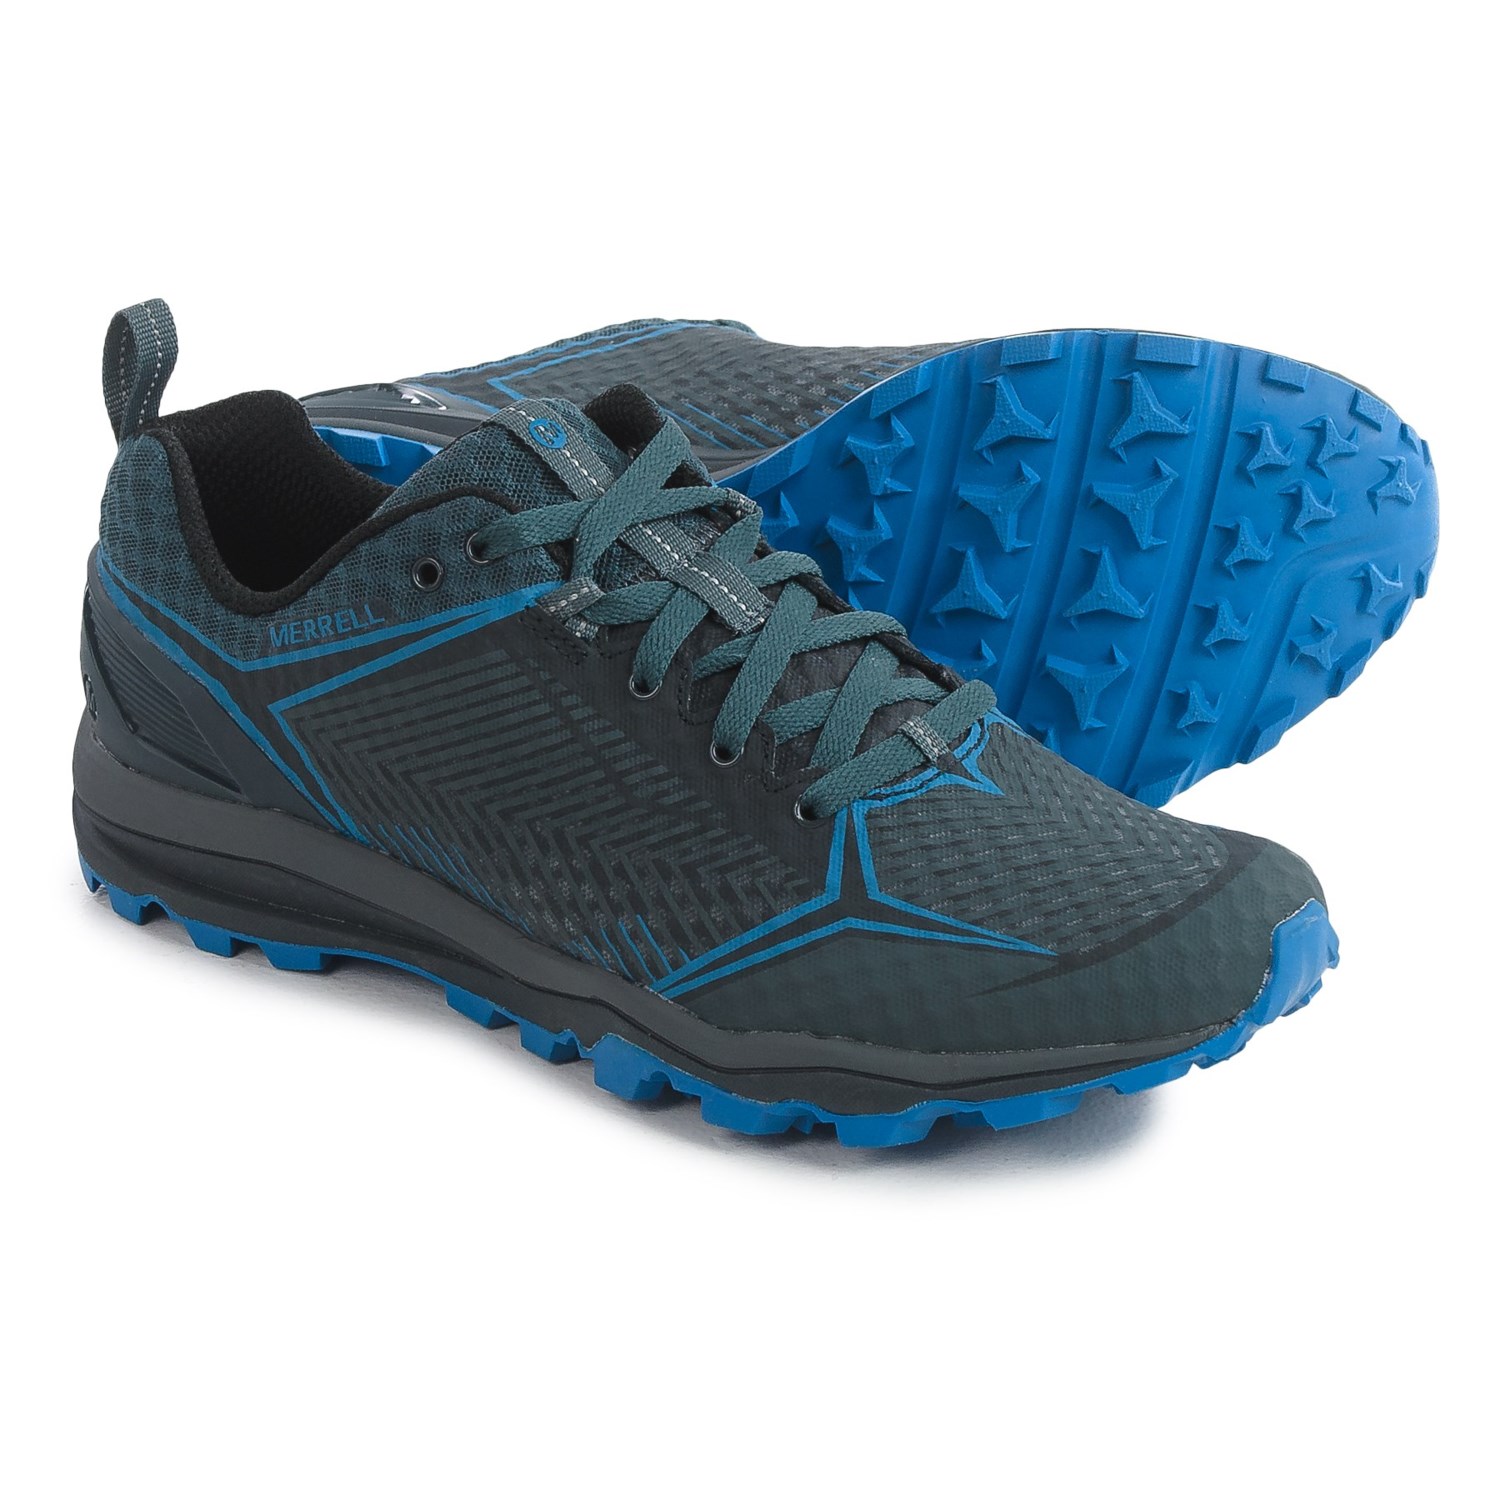 Merrell All Out Crush Shield Trail Running Shoes (For Men) - Save 54%